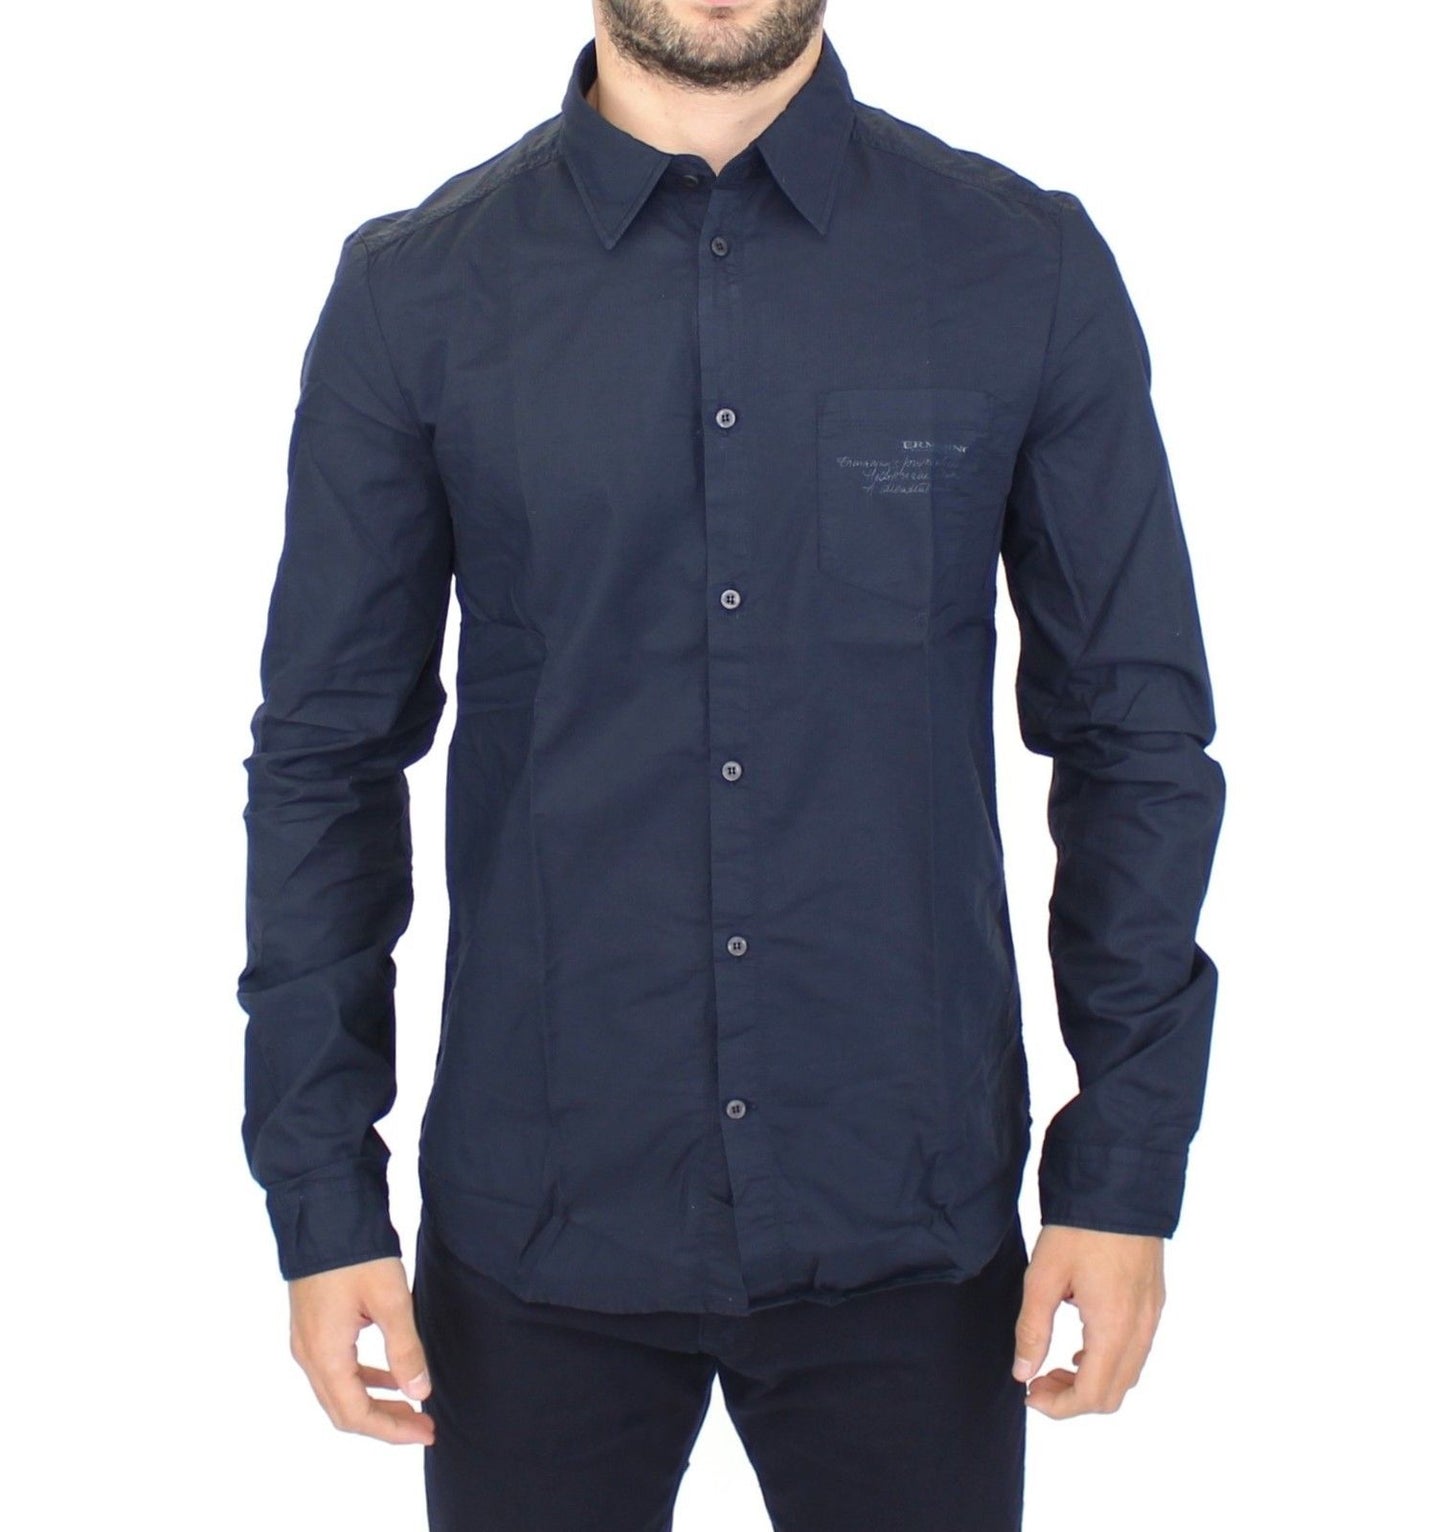 Ermanno Scervino Blue Cotton Casual Long Sleeve Shirt Top